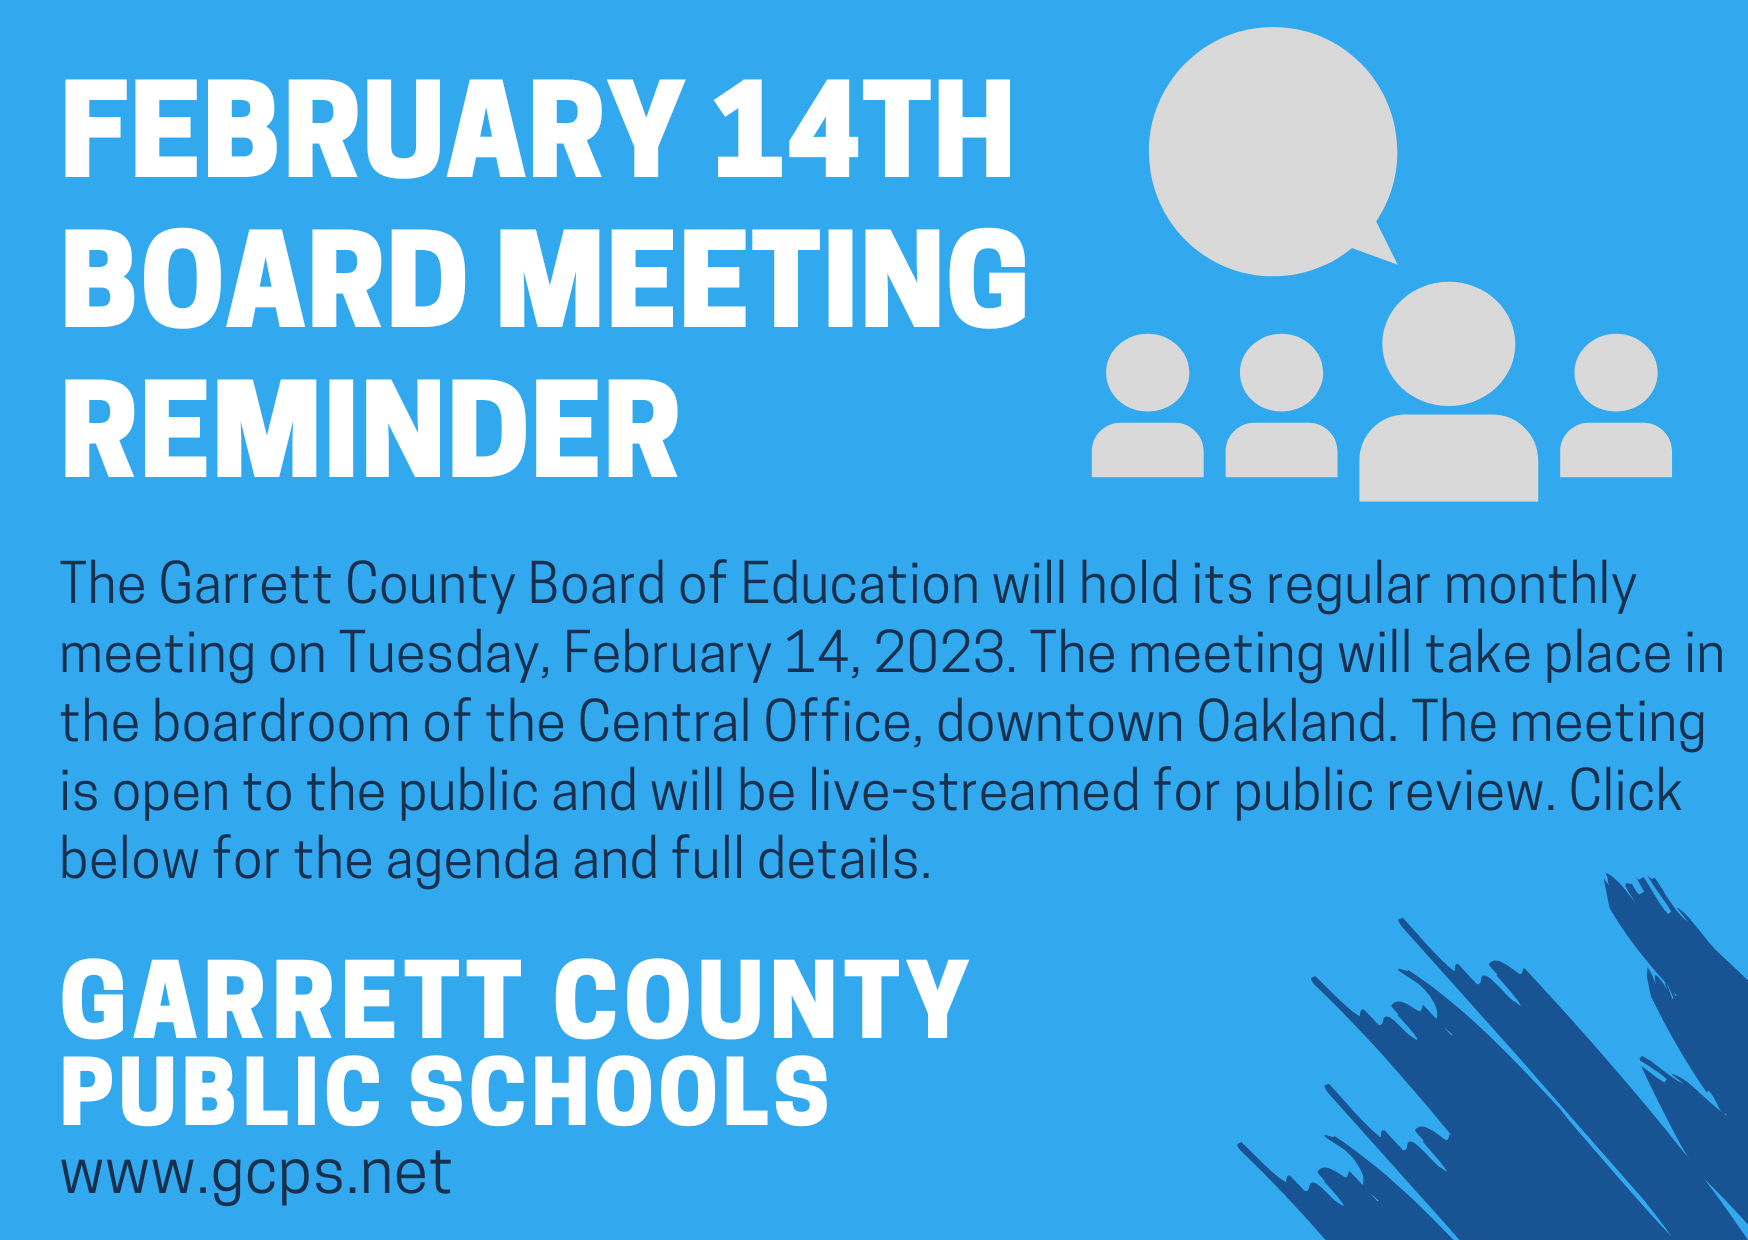 February 14, 2023 Board of Education Meeting